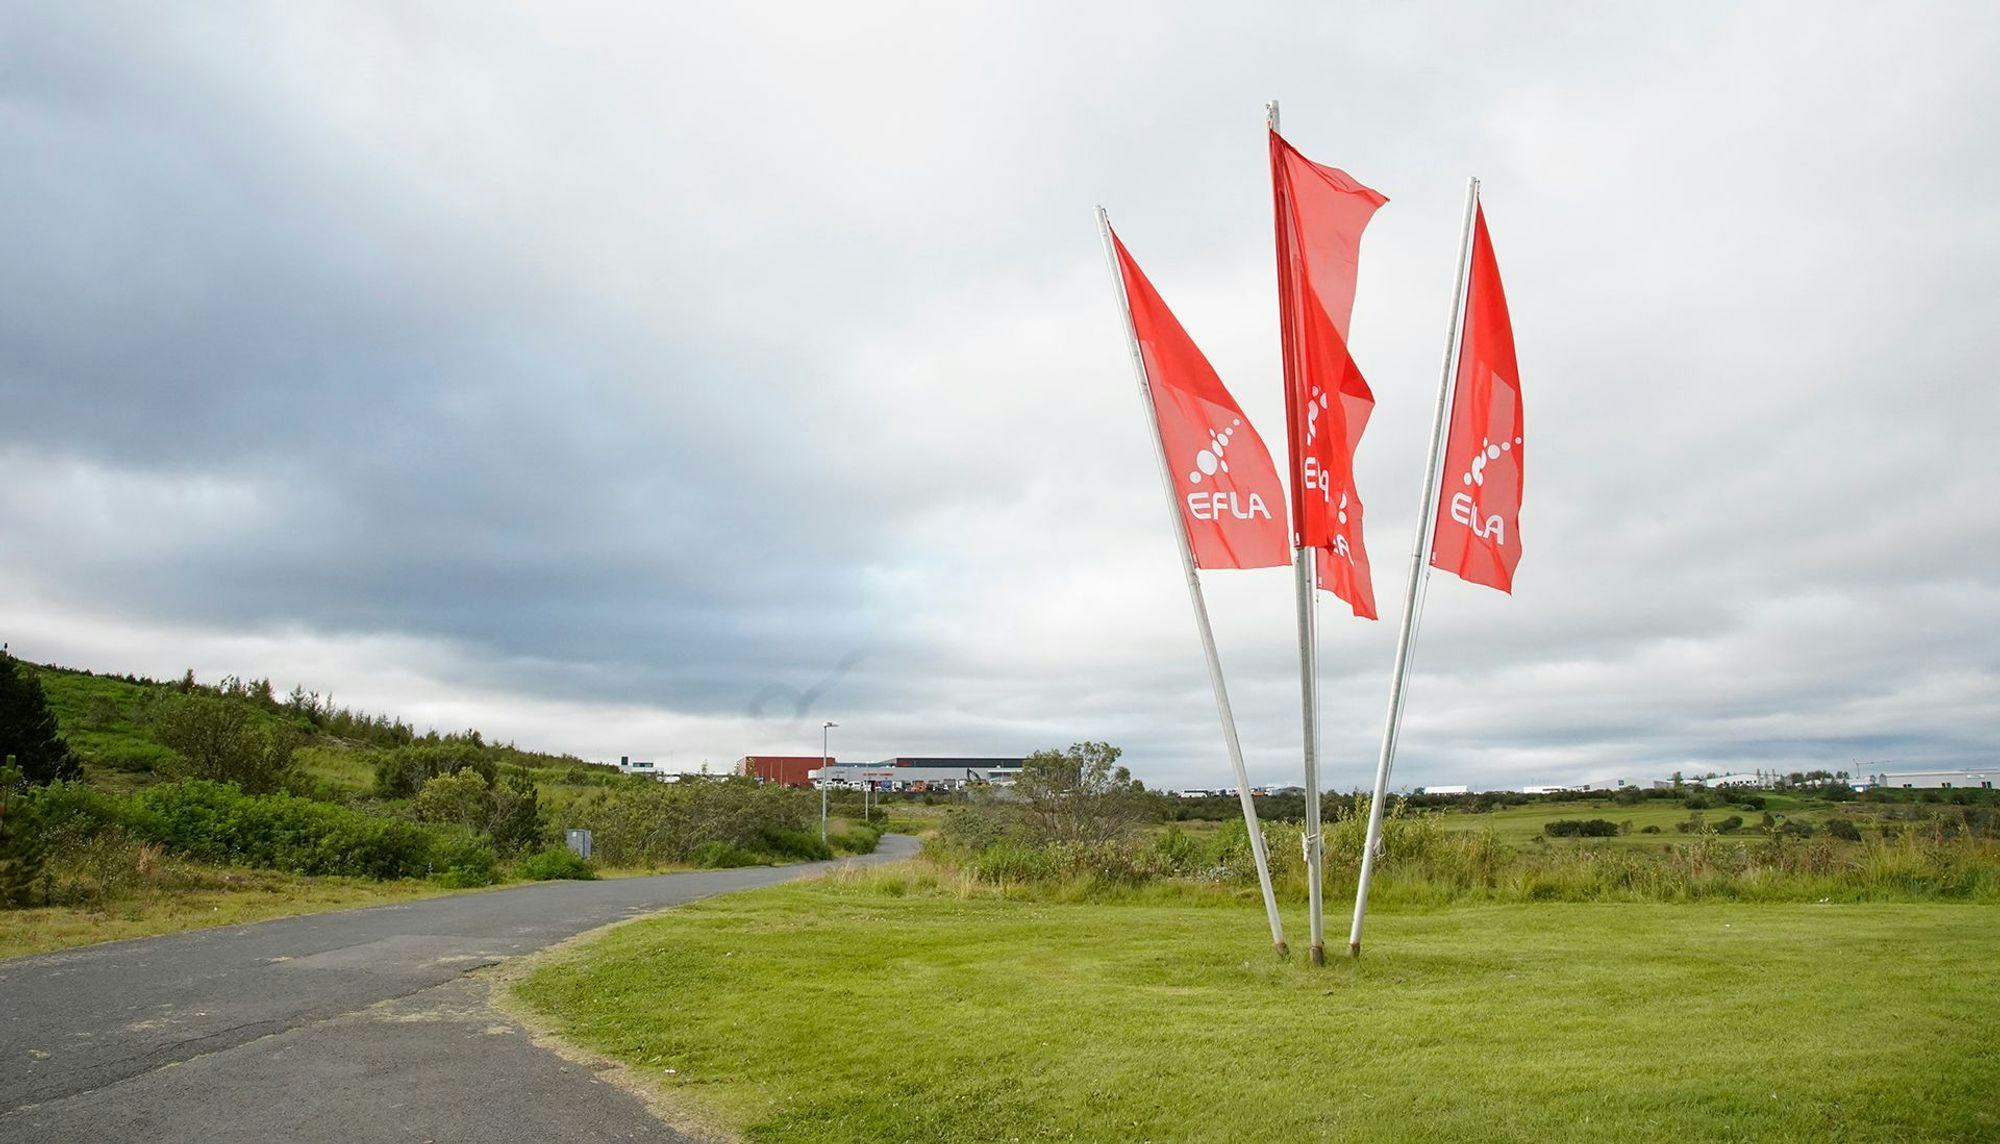 Three red flags with the logo "EFLA" fluttering in the wind on a golf course 